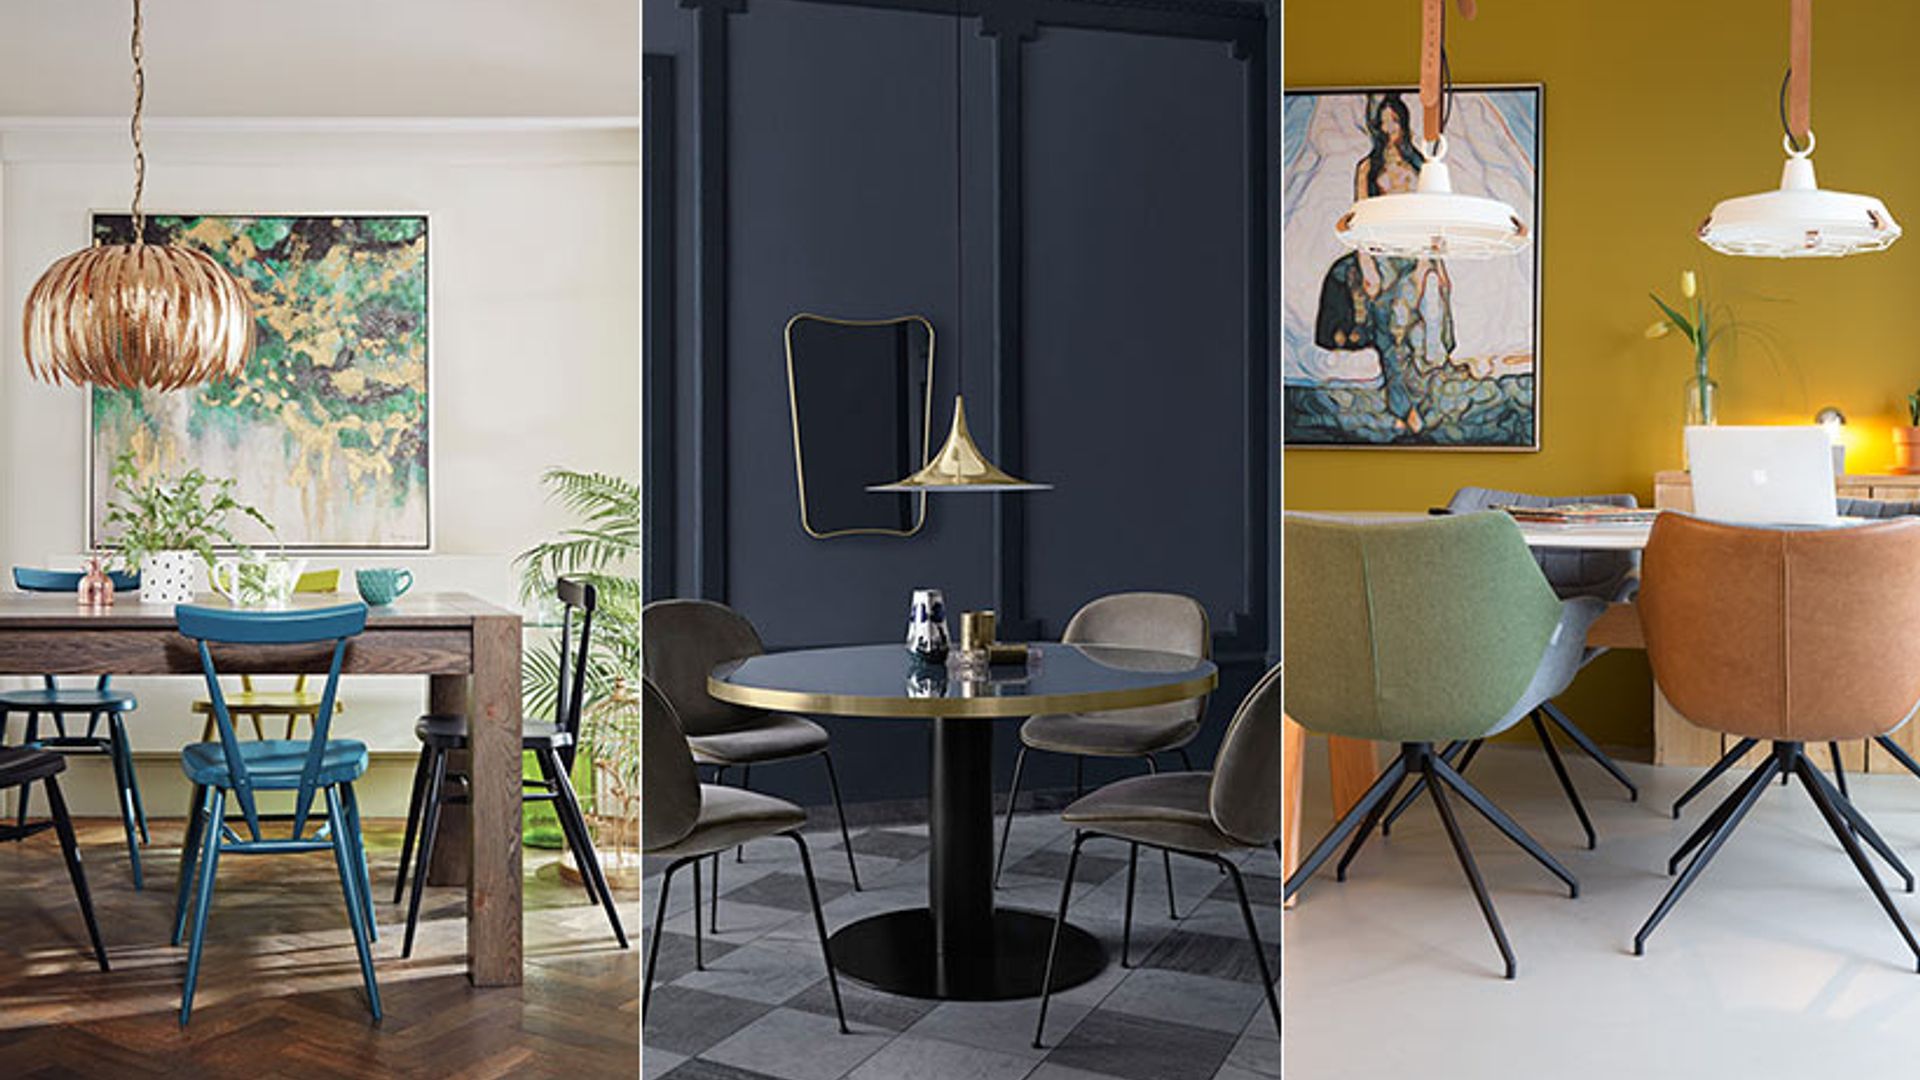 10 Small Dining Room Ideas To Make The Most Of Your Space